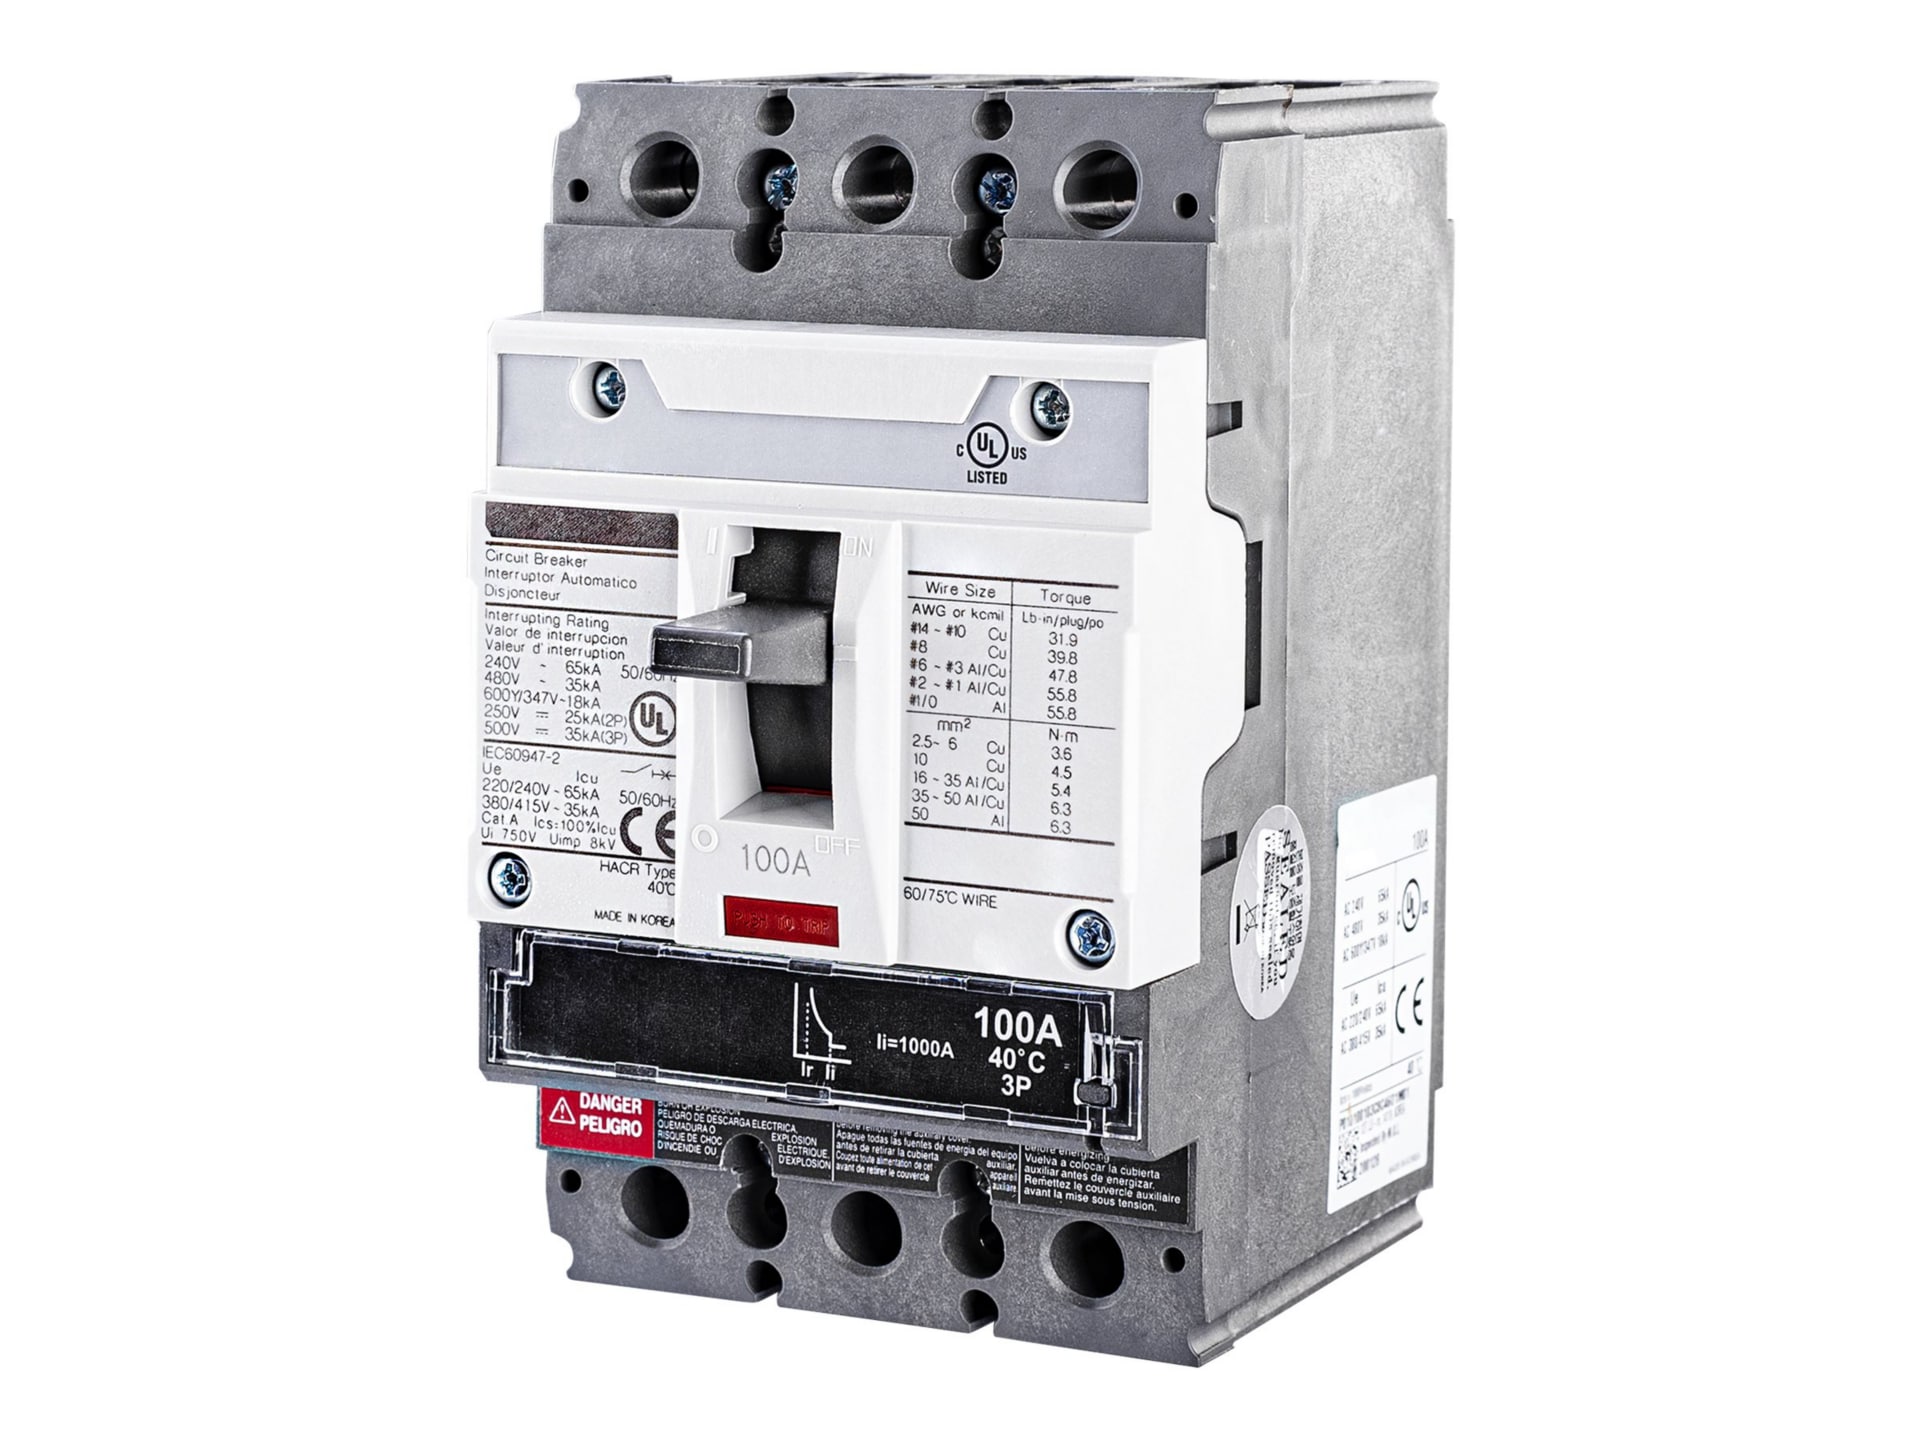 CyberPower SMUCB100UAC - automatic circuit breaker